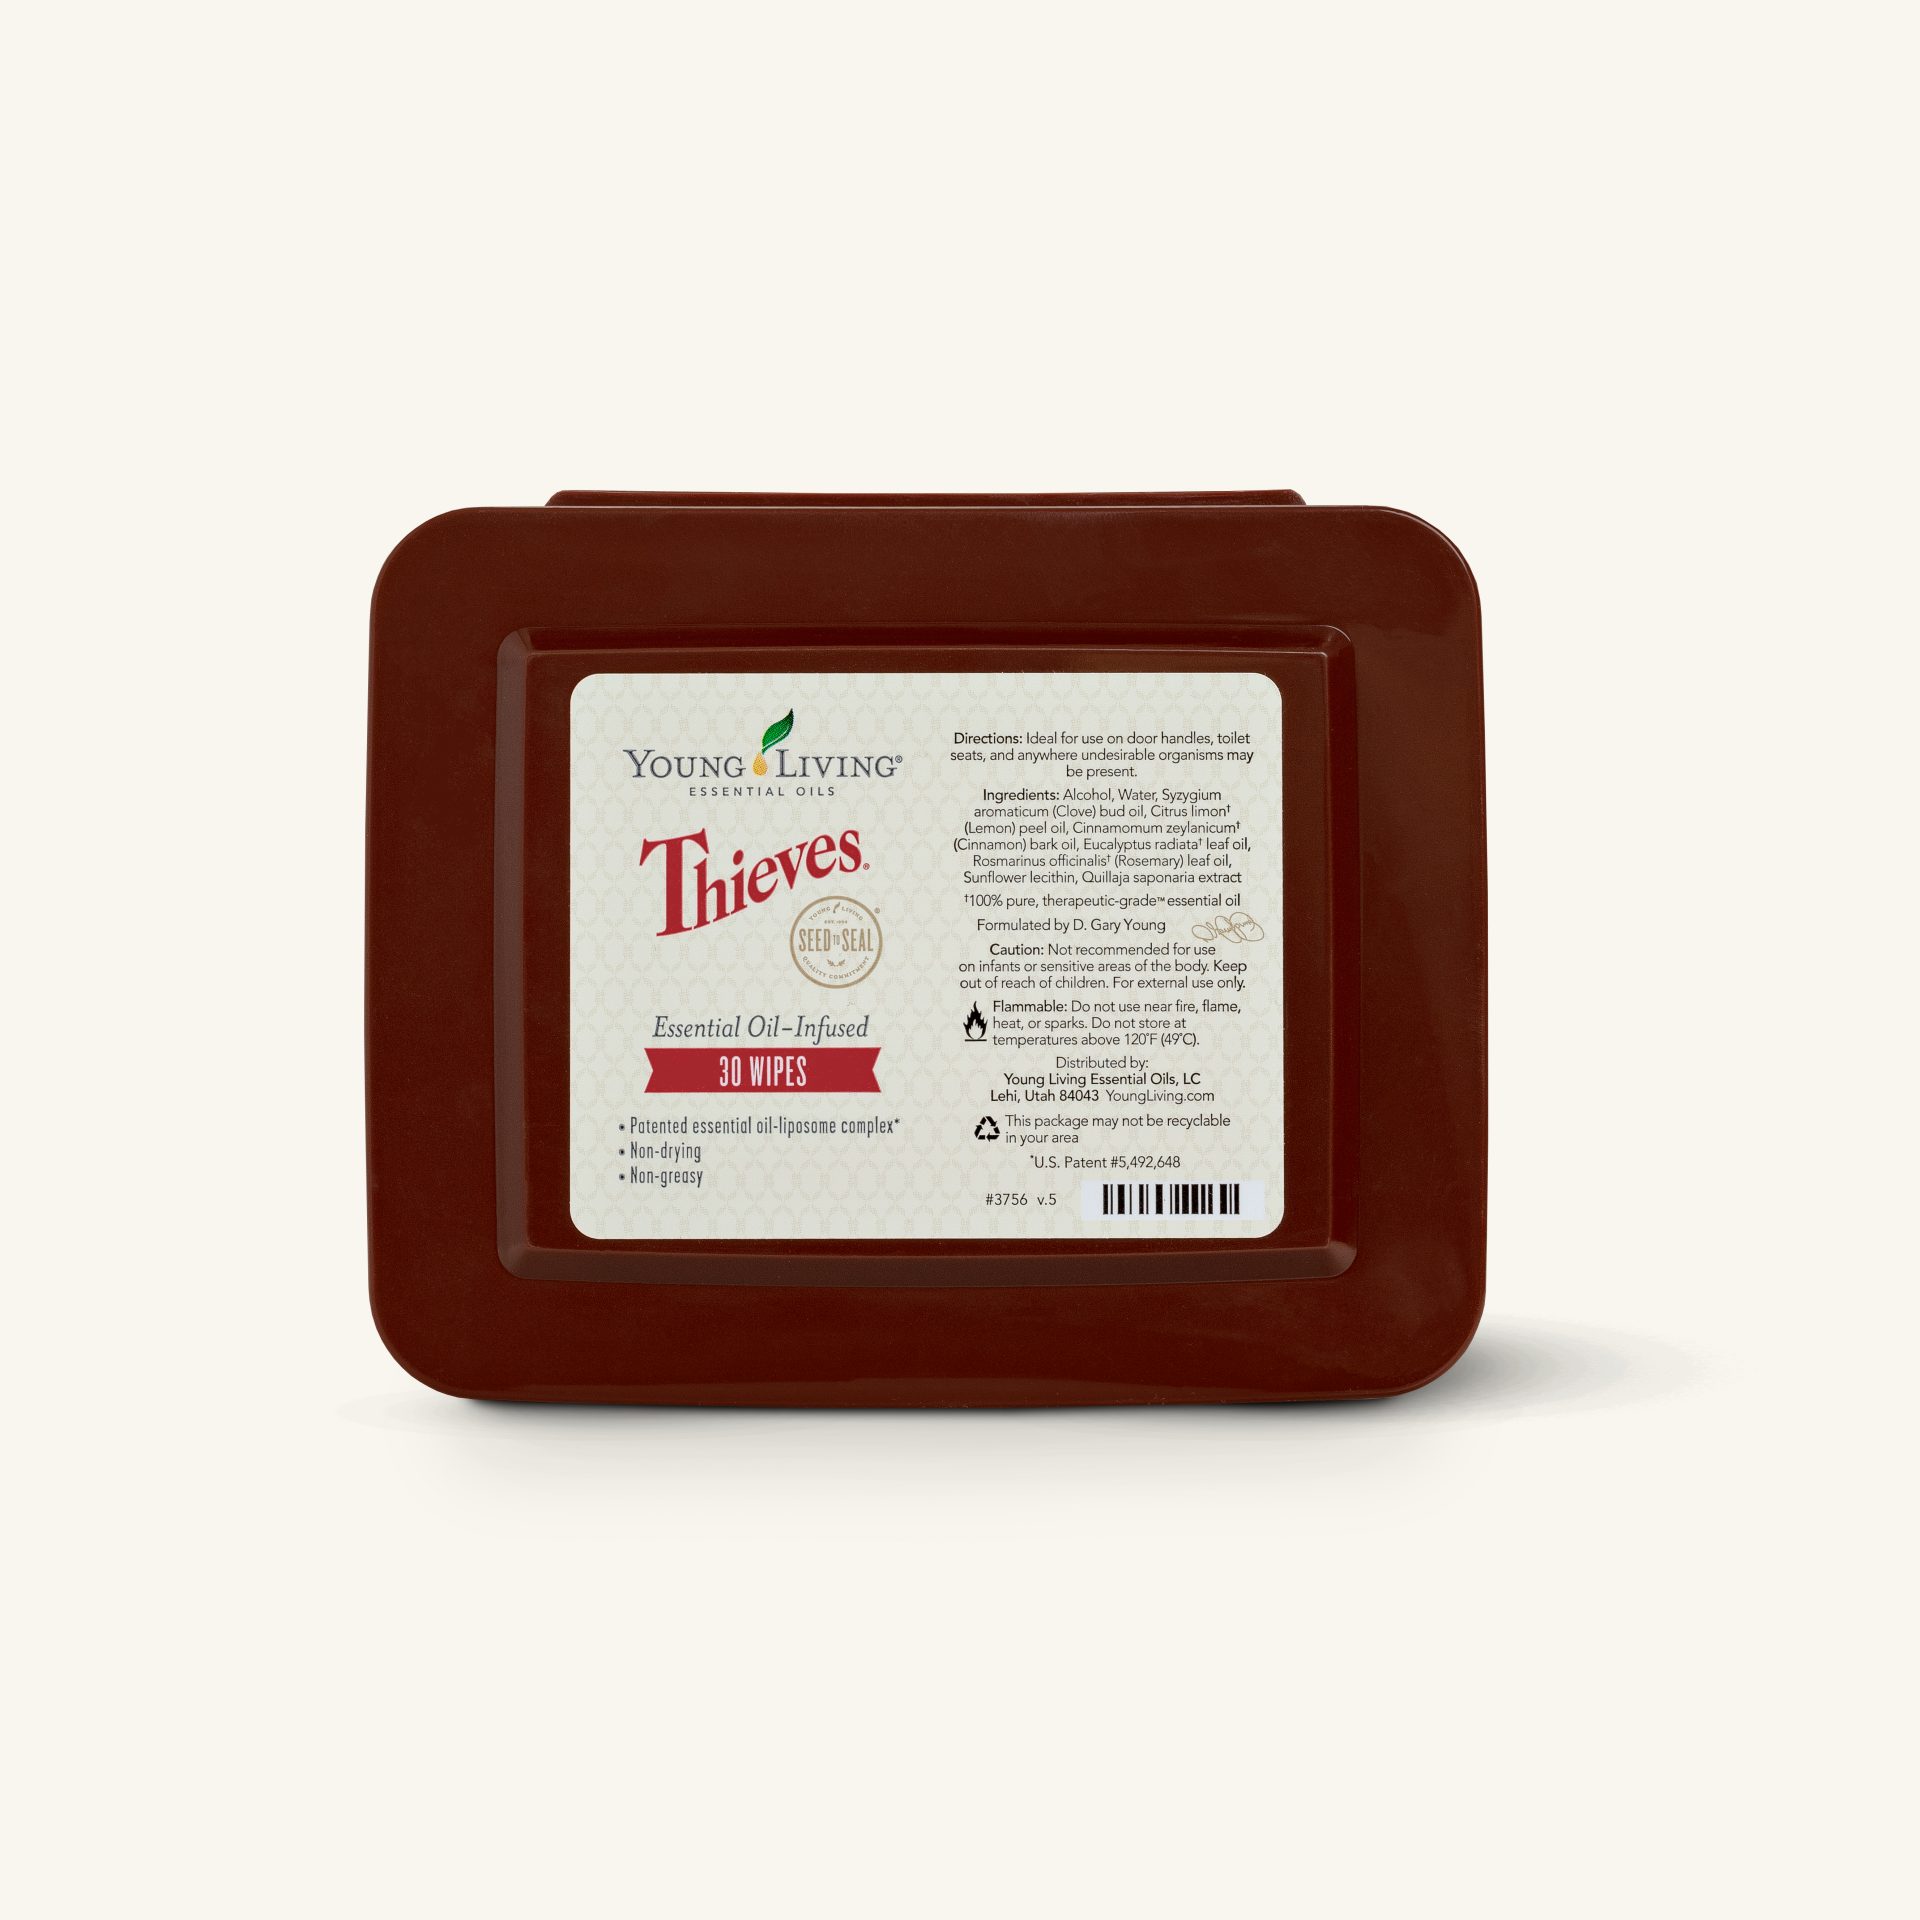 Thieves Wipes - Young Living Essential Oils